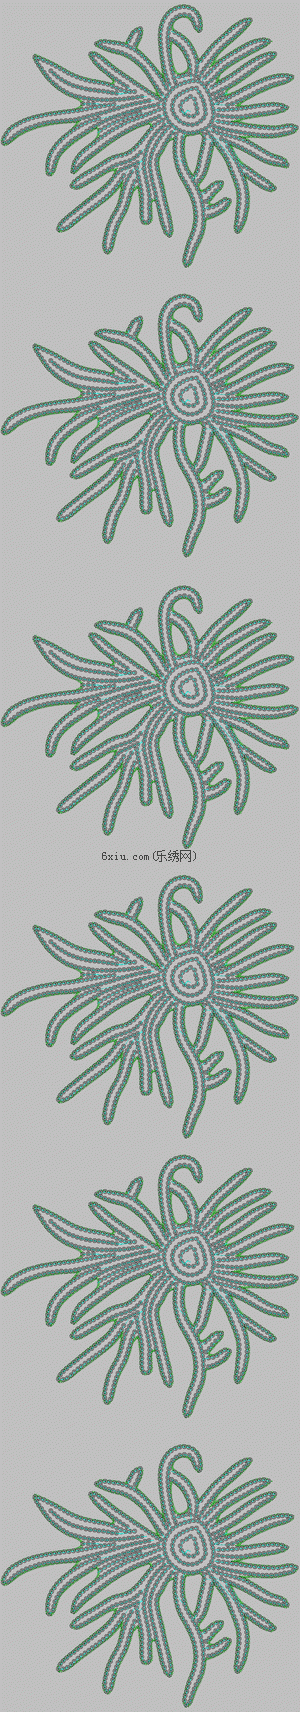 Bead curve embroidery pattern album